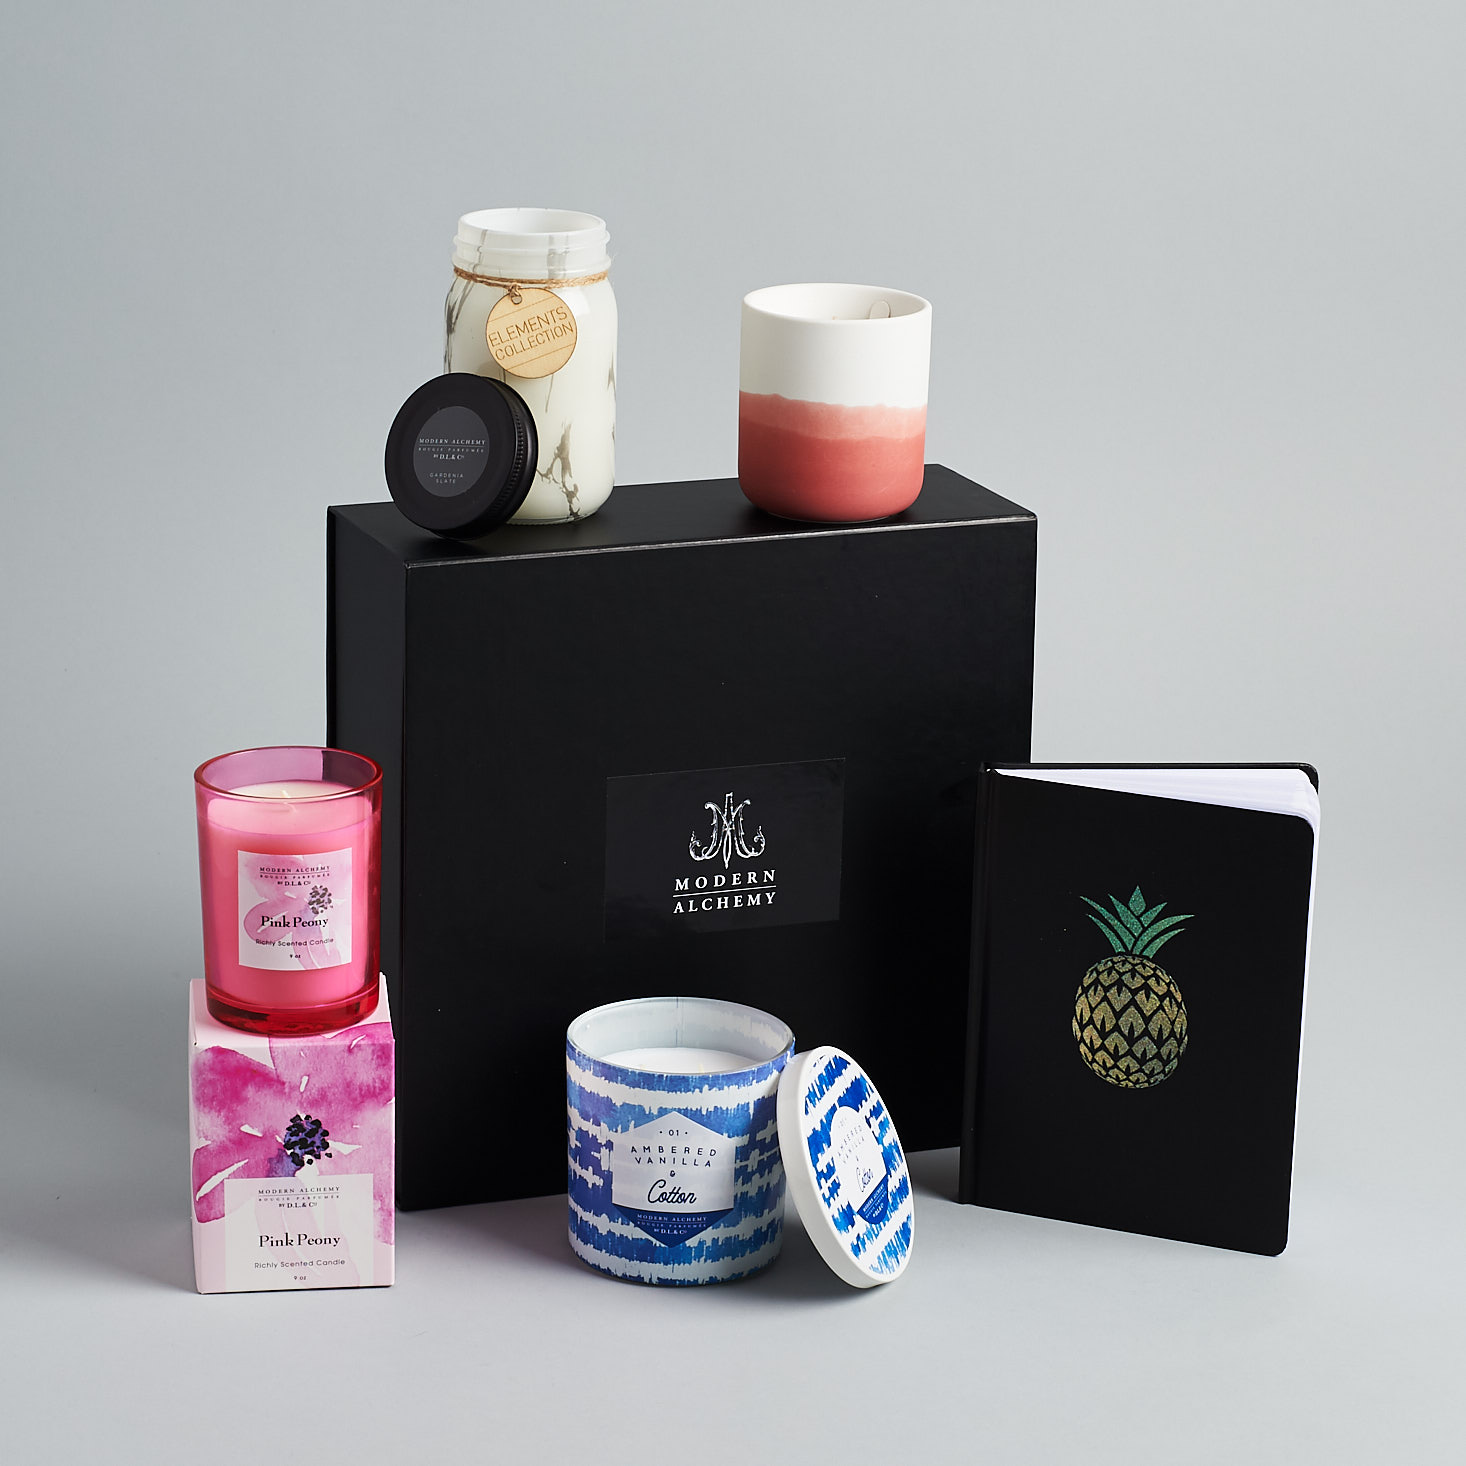 D.L. & Co. Candle Subscription MA Box Review – Spring 2018